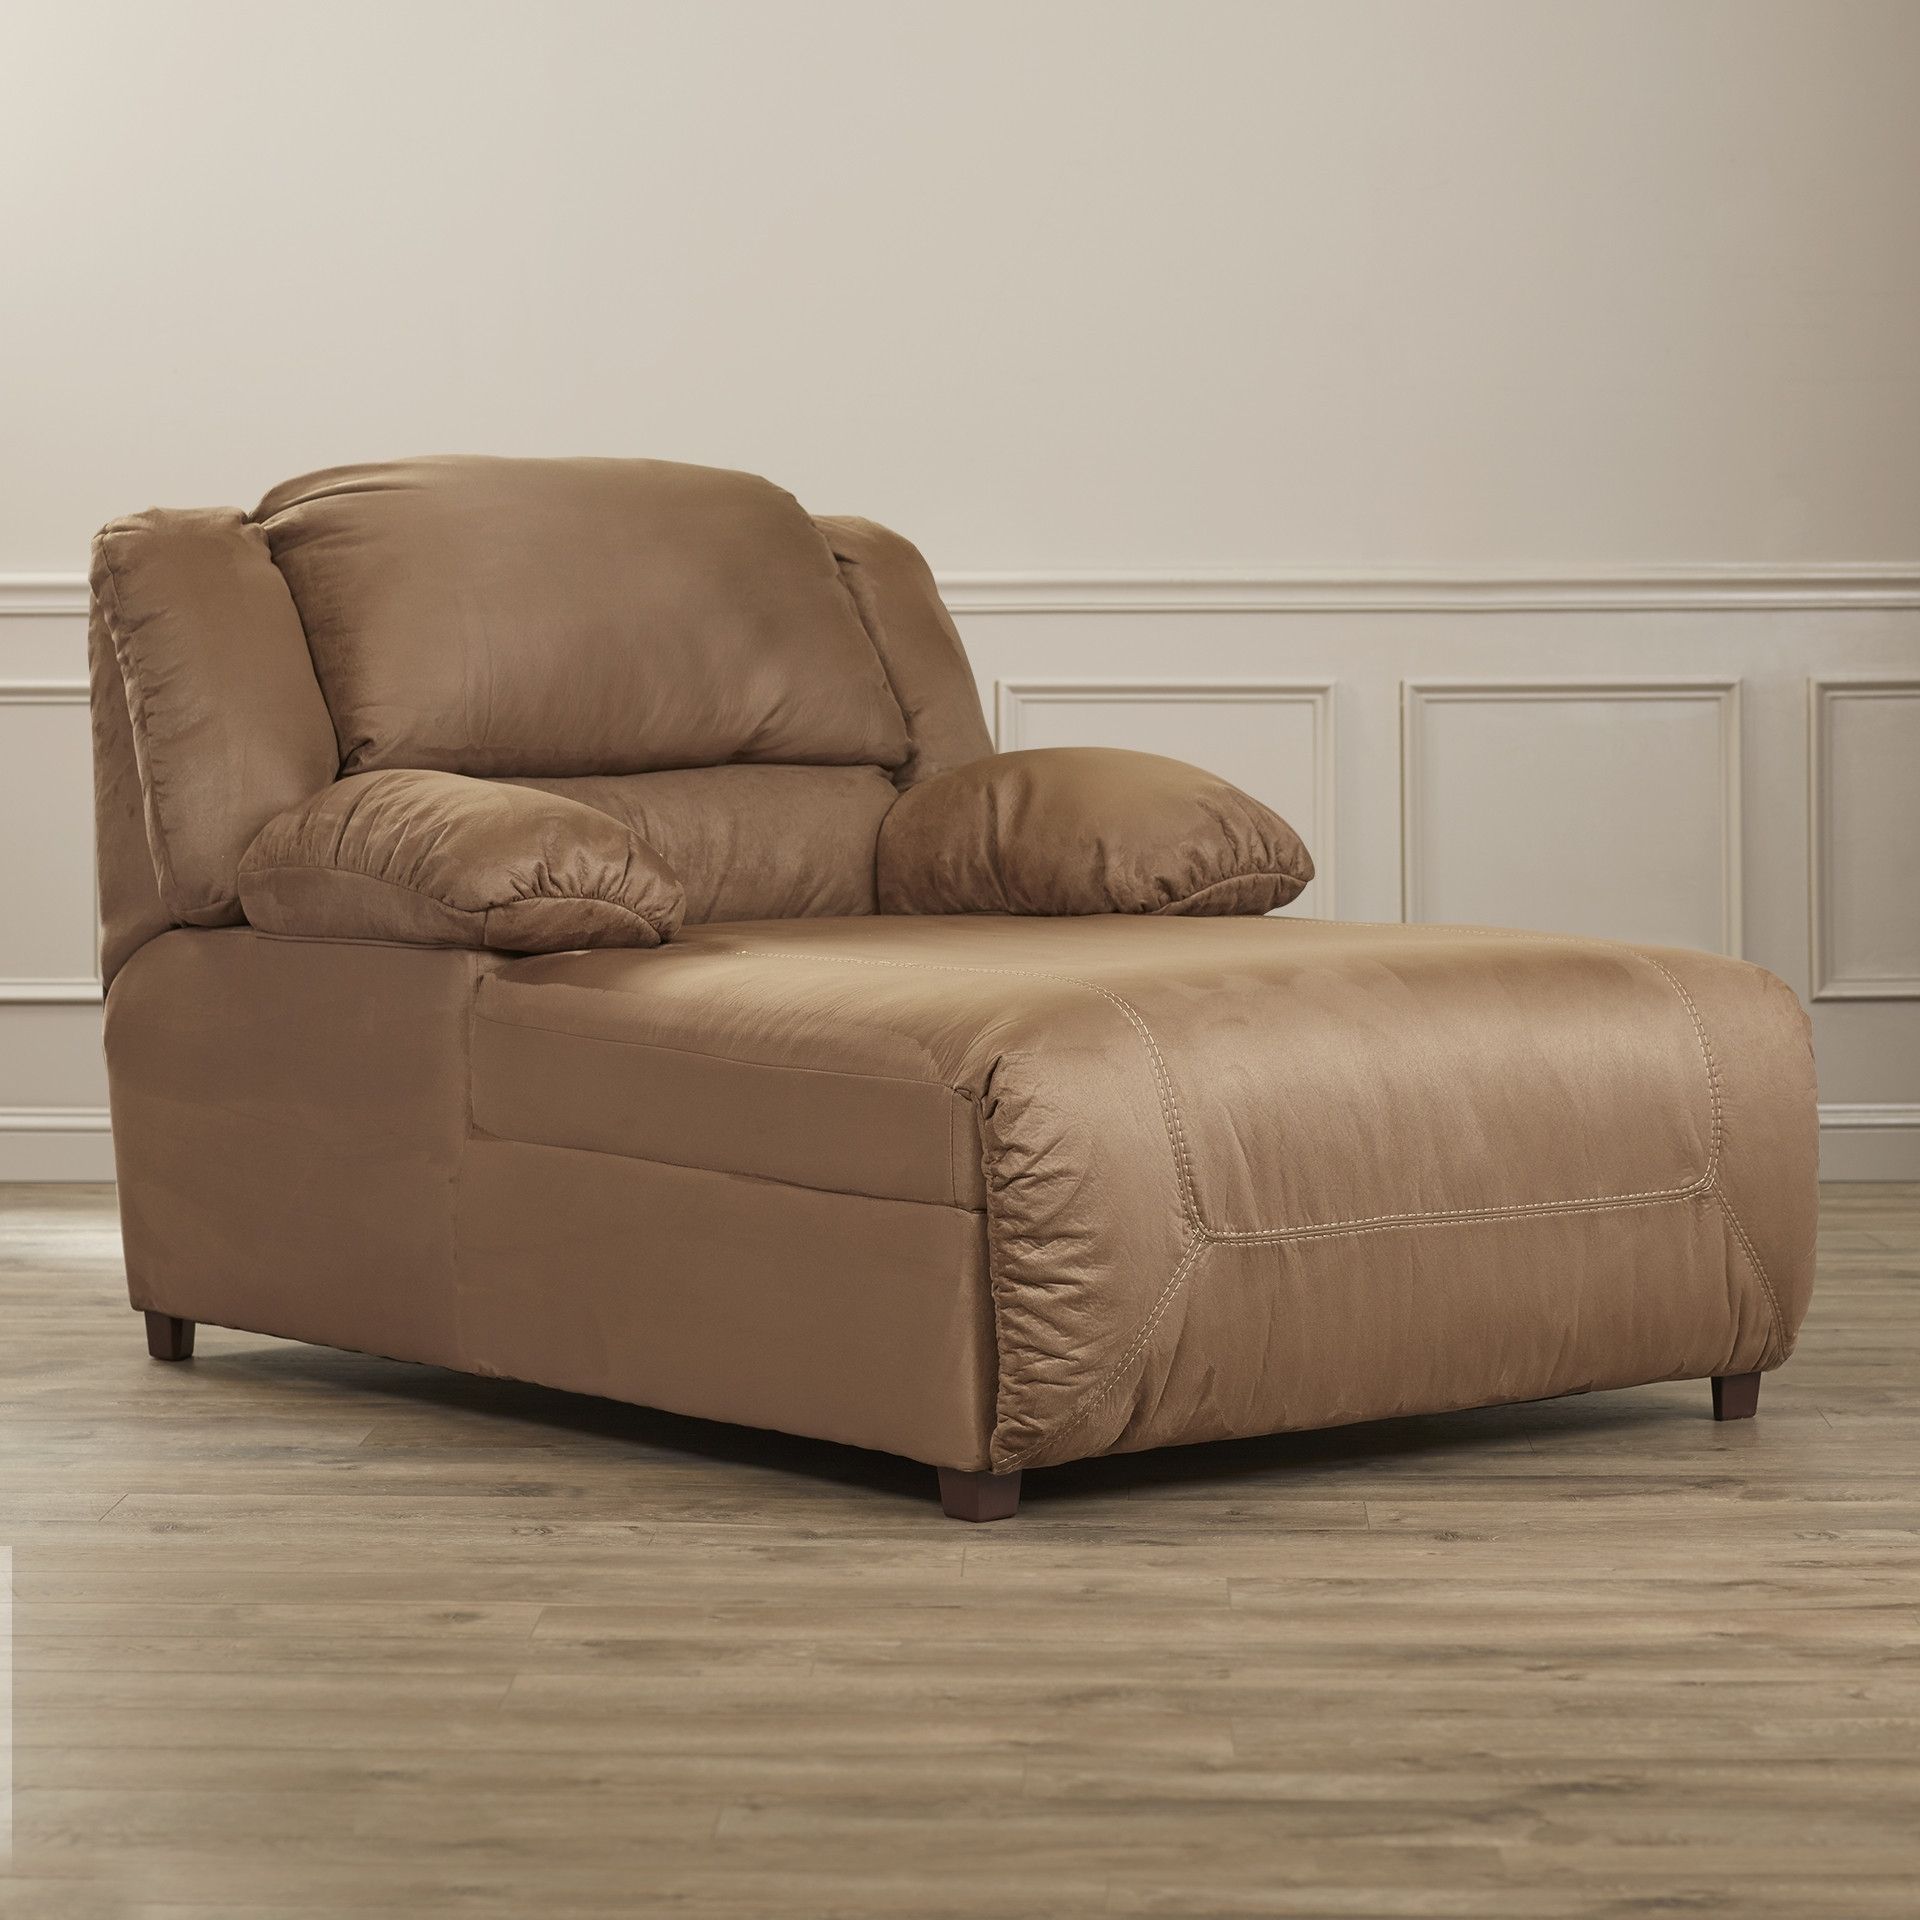 Microfiber Chaise Lounges With Regard To Current Awesome Microfiber Chaise Lounge Chair – Home (Photo 1 of 15)